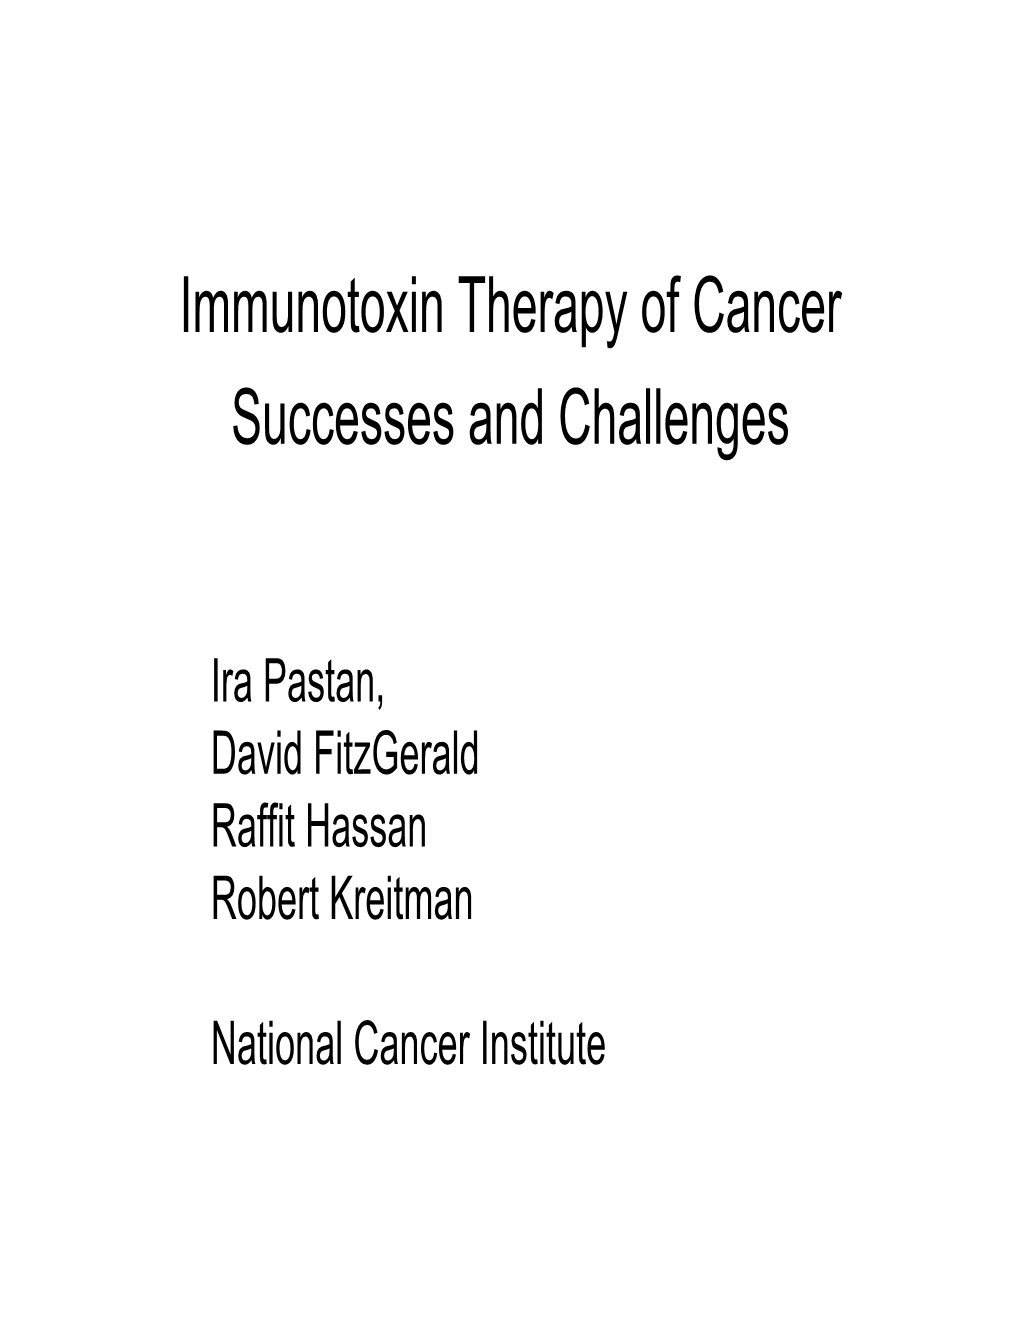 Immunotoxin Therapy of Cancer Successes and Challenges